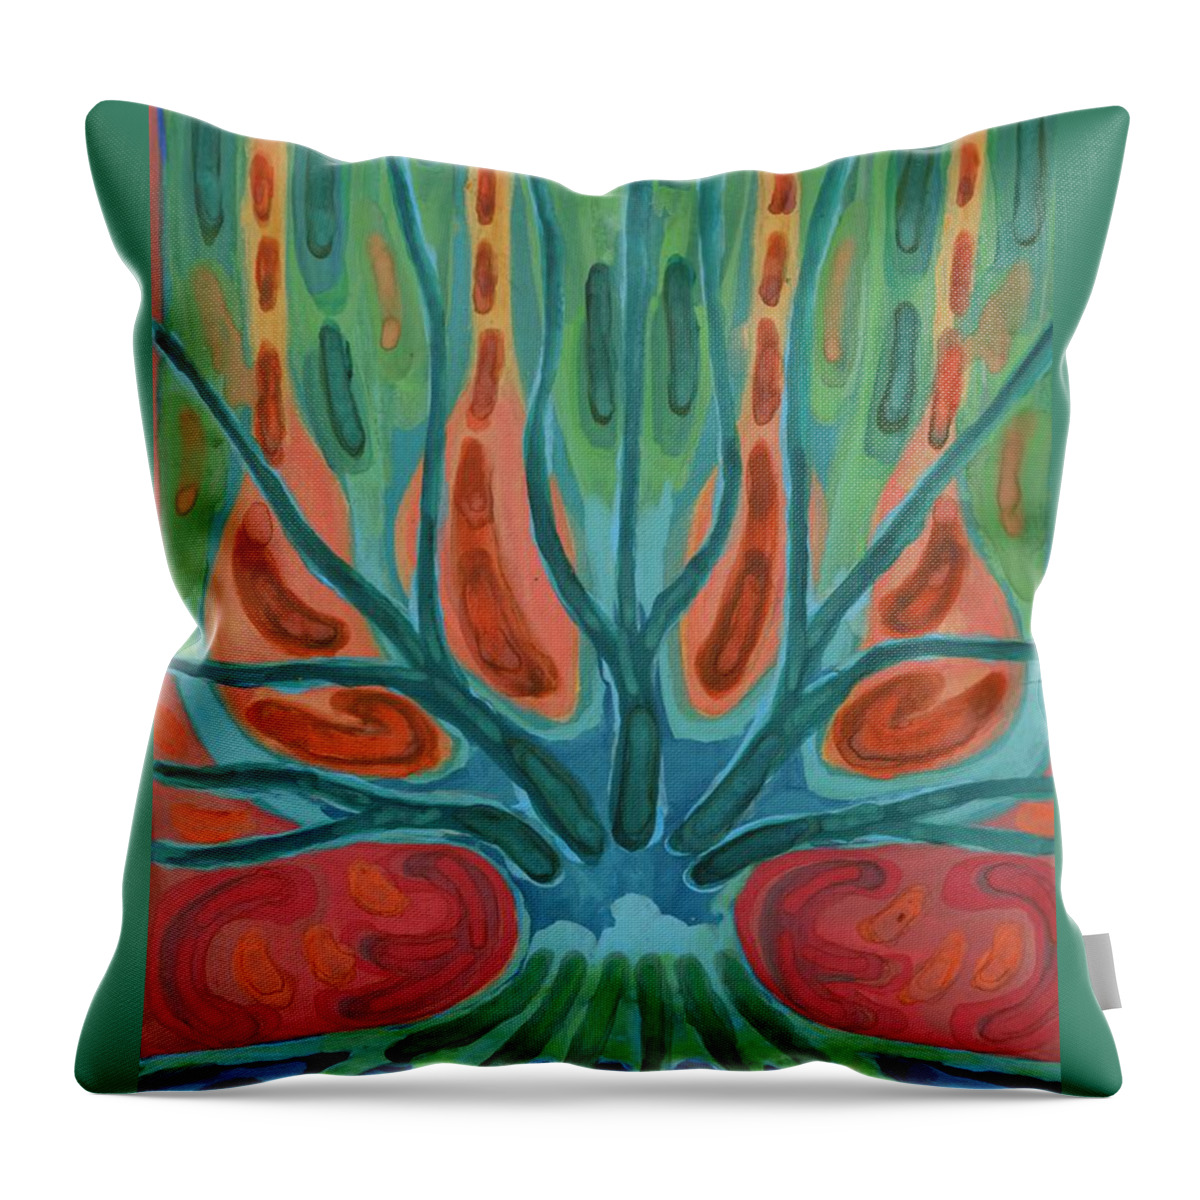 Colour Throw Pillow featuring the painting Unfinished Tree by Wojtek Kowalski